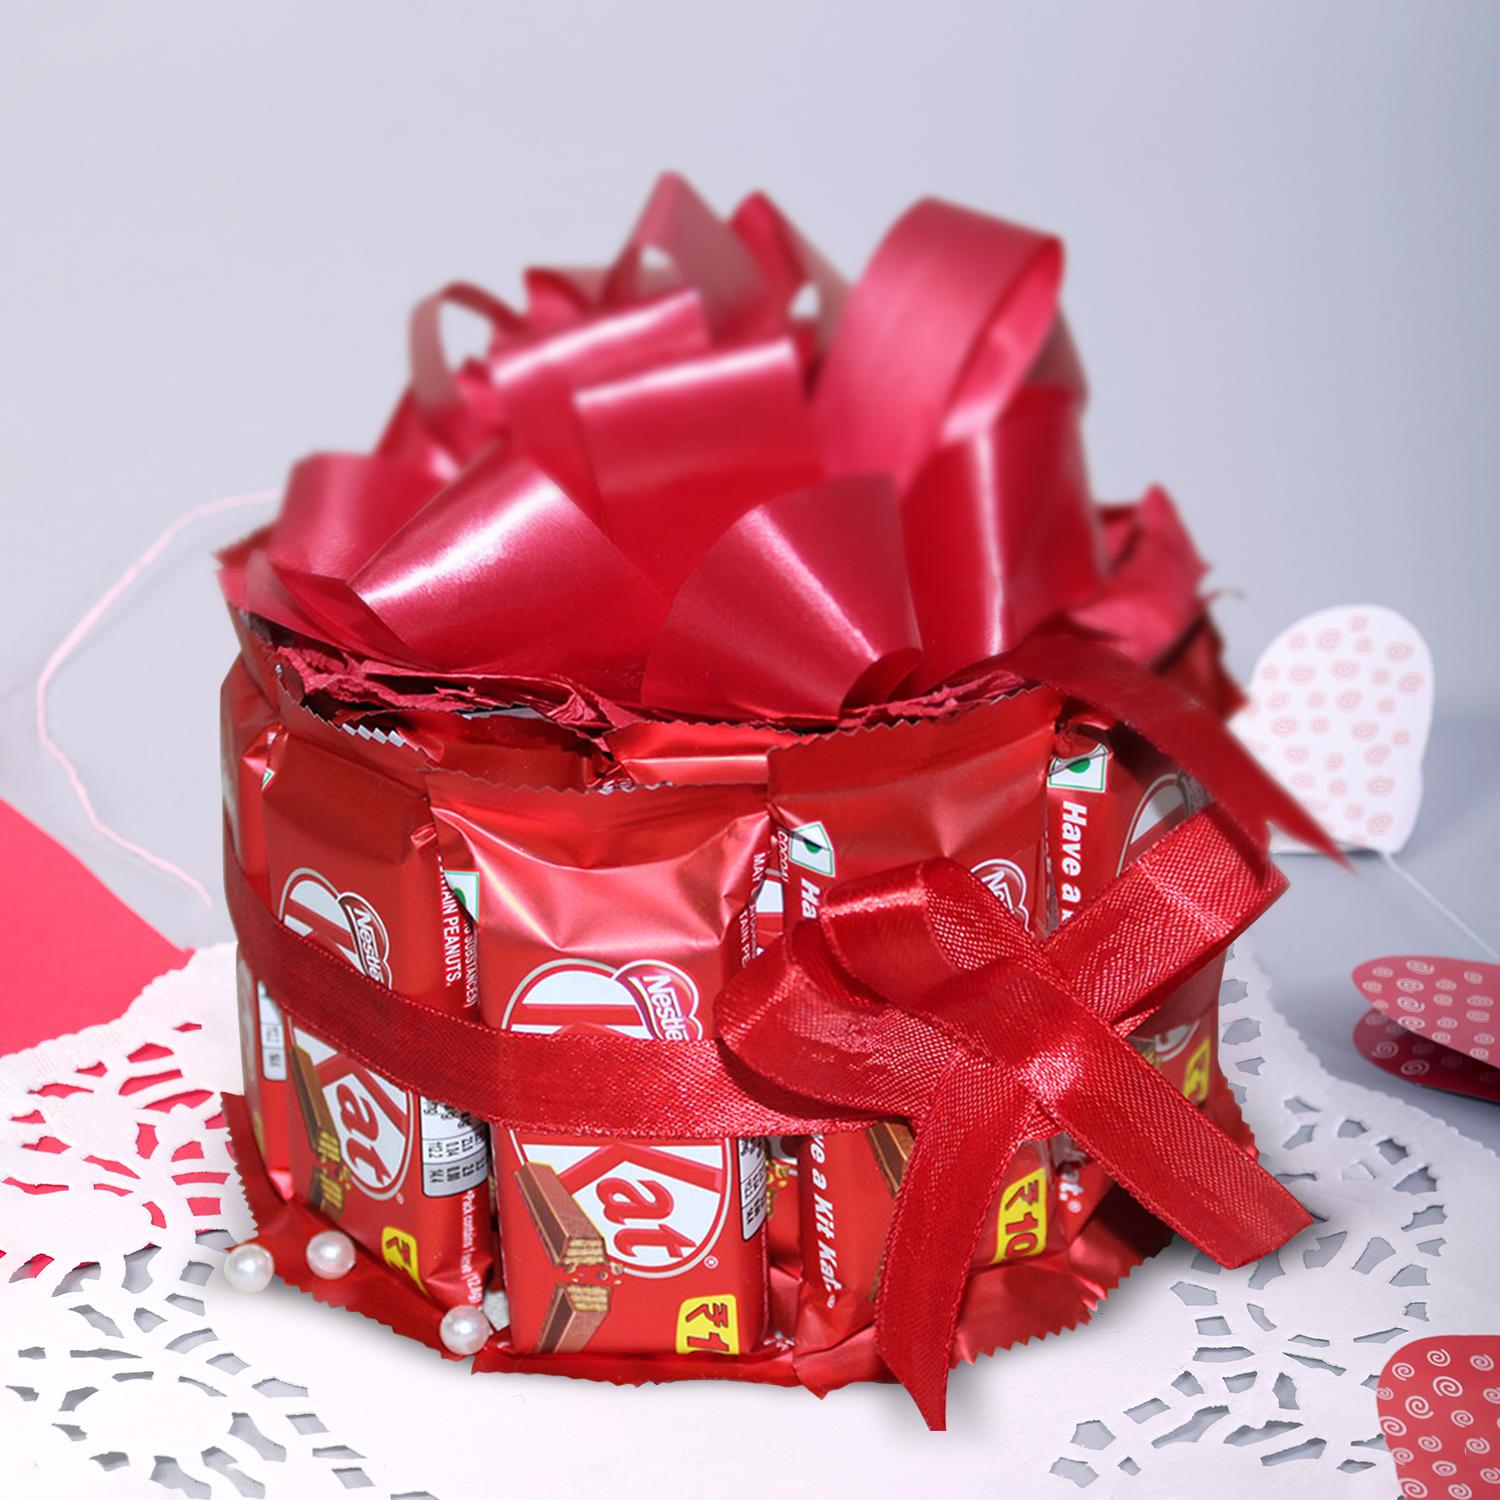 Shop Kitkat Love Chocolate Gift pack with handemade diary @ Rs 499